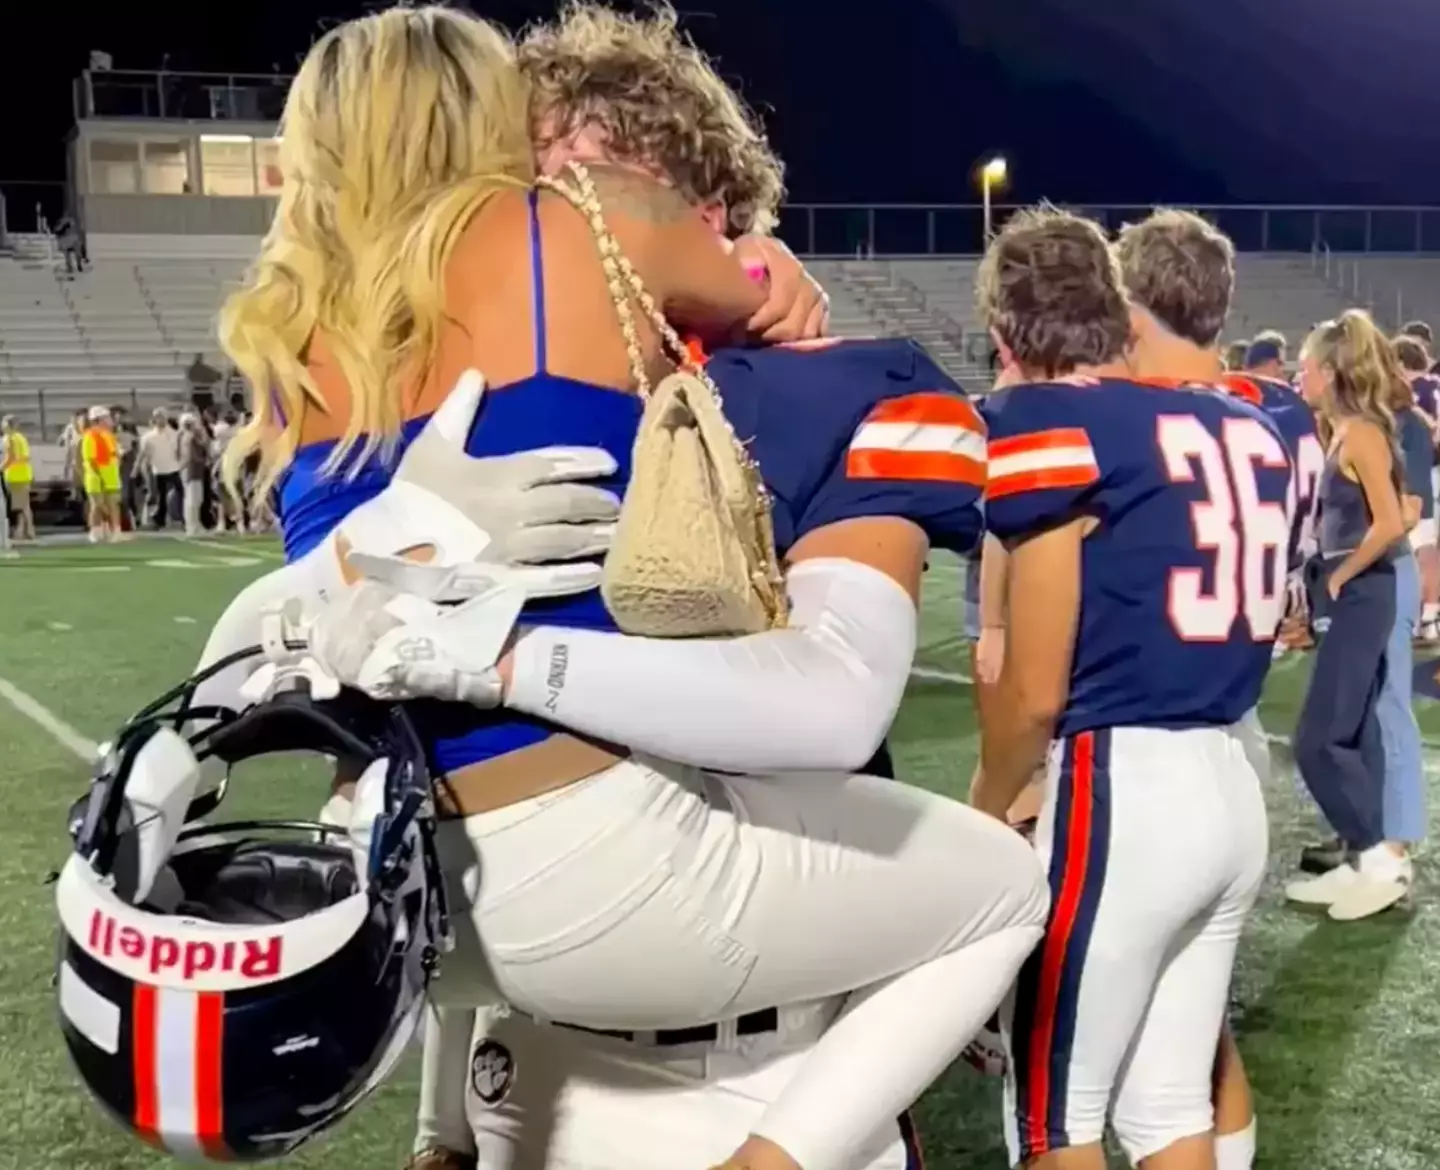 Amber hugged her son after the football game.